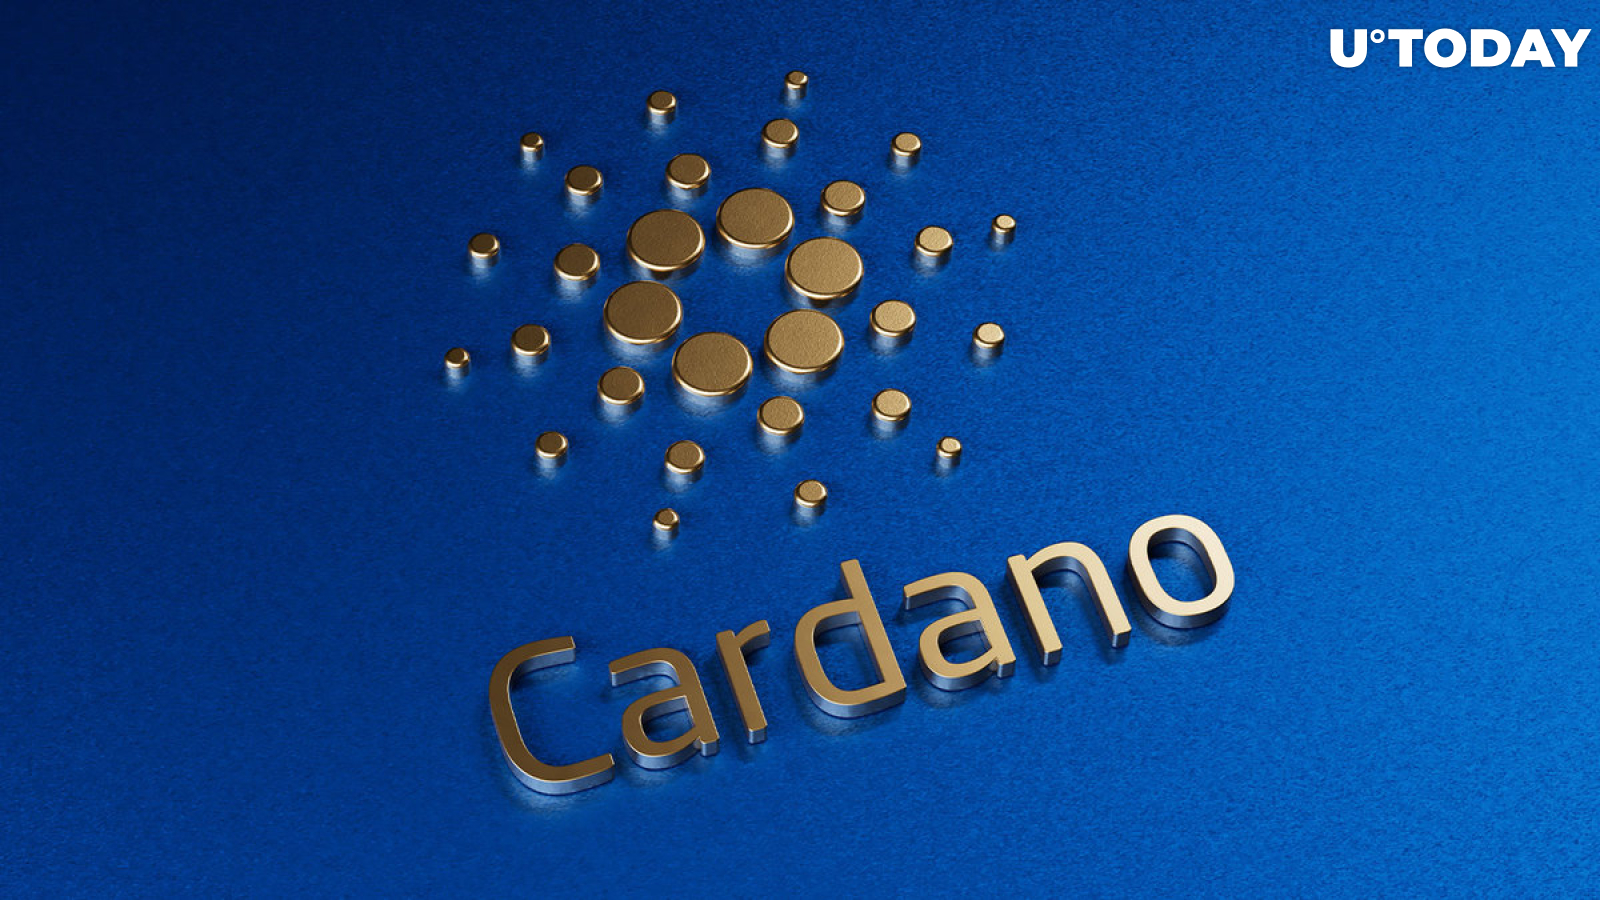 Cardano's Stablecoin Djed to Go Live in January 2023